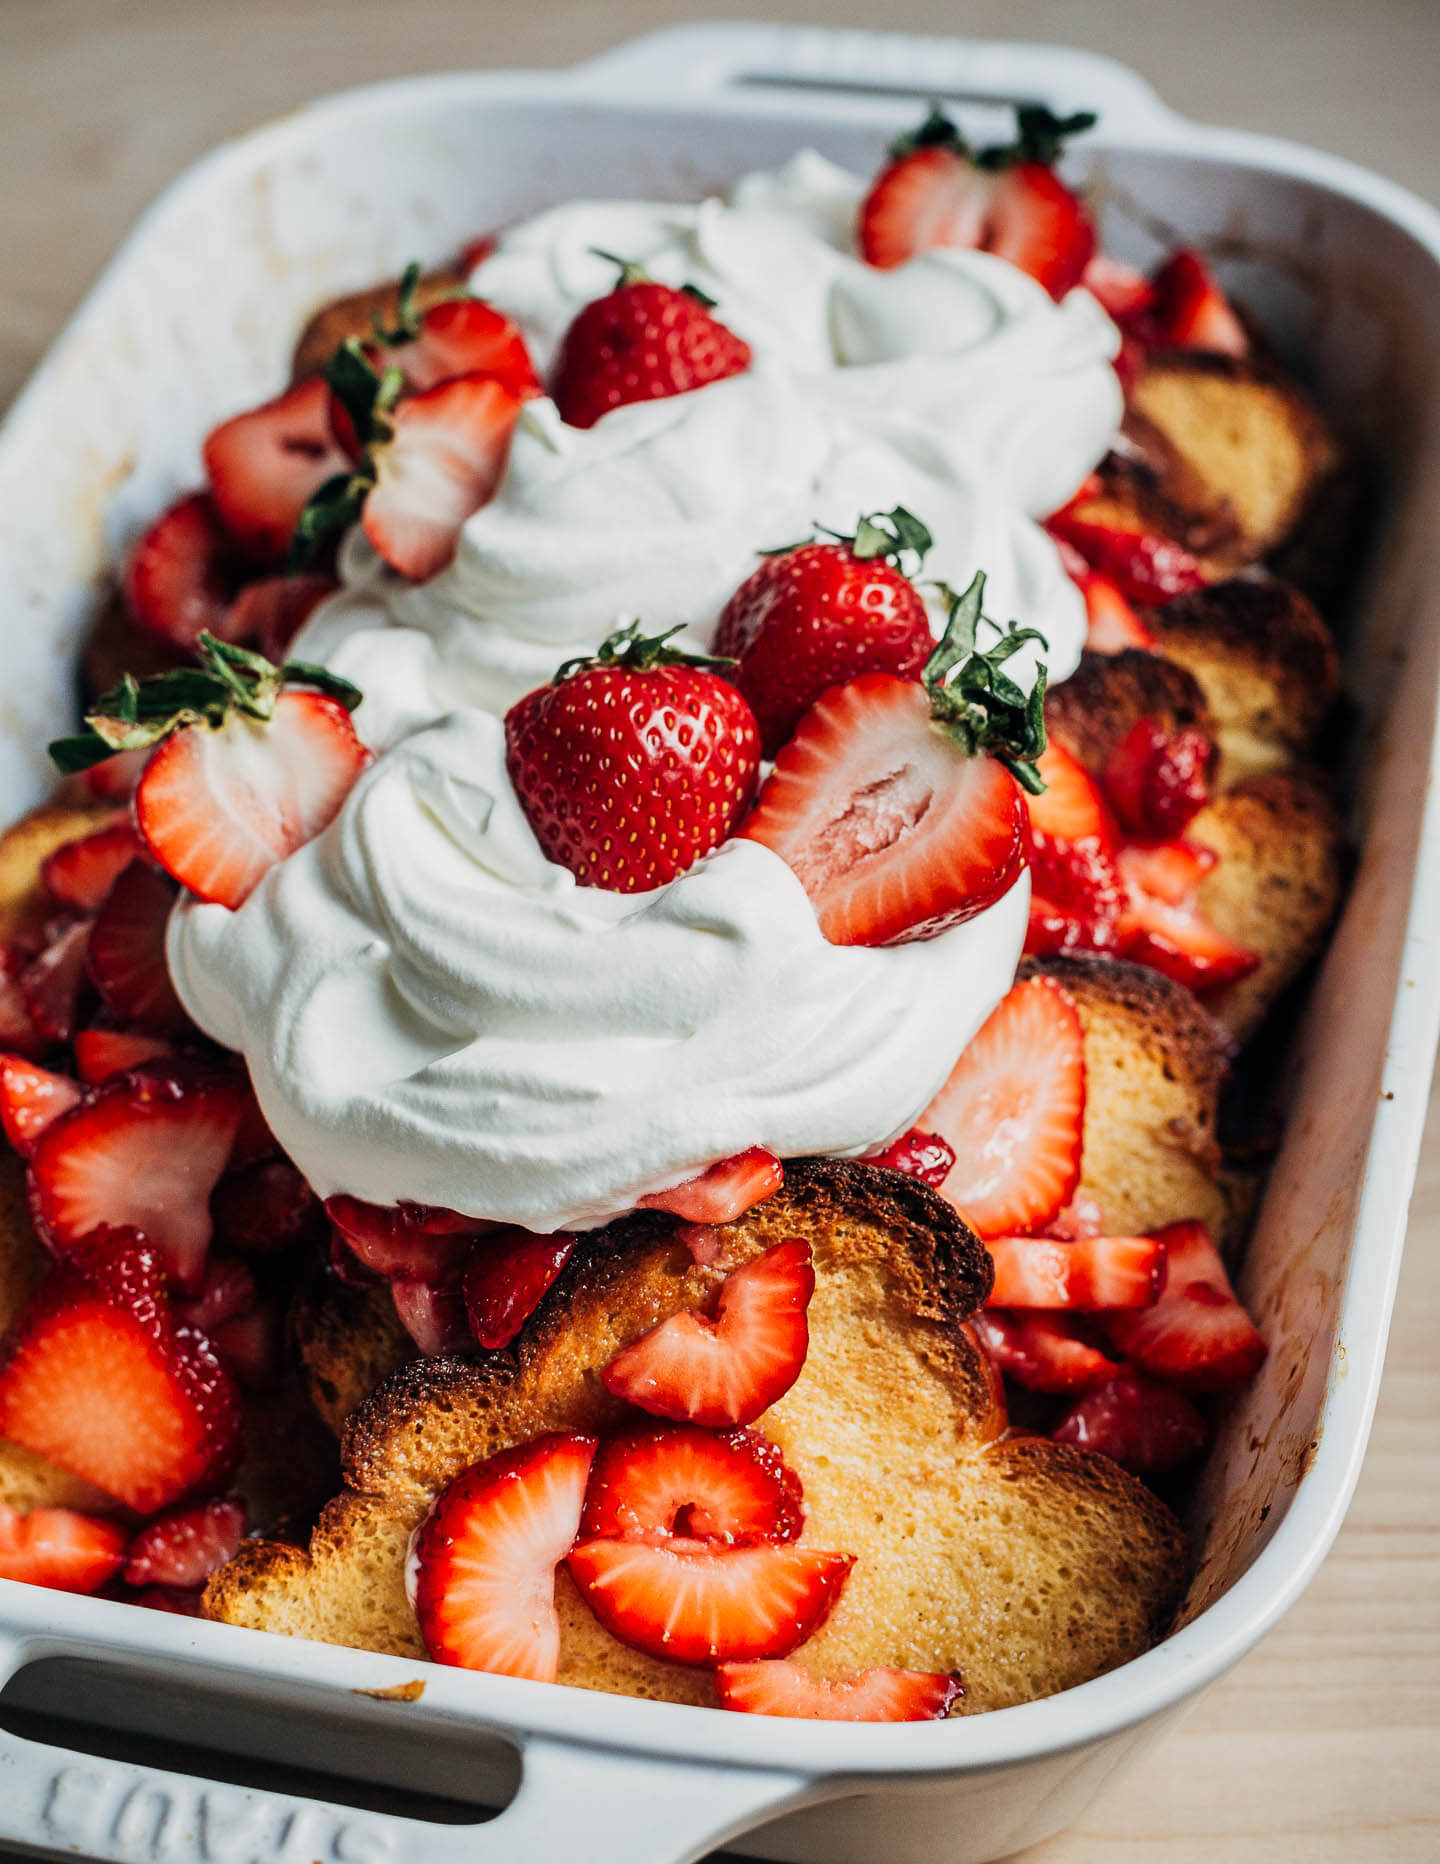 A baking dish with baked French toast topped with whipped cream and strawberries.